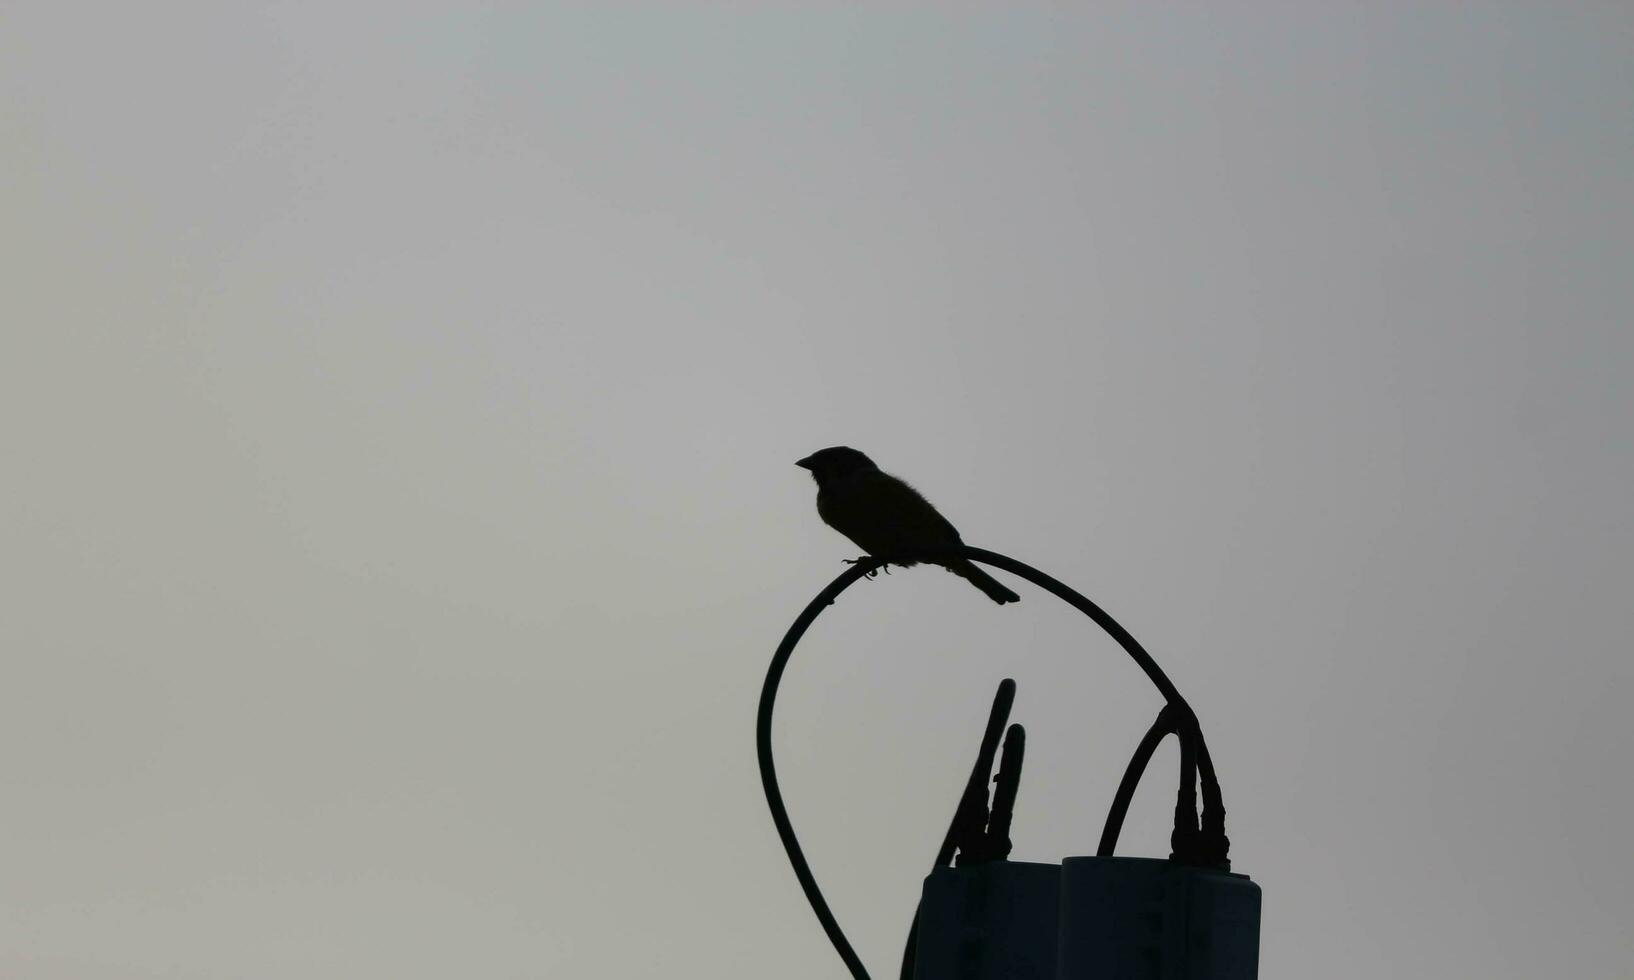 Silhouette of a sparrow perched on a cable in the afternoon photo